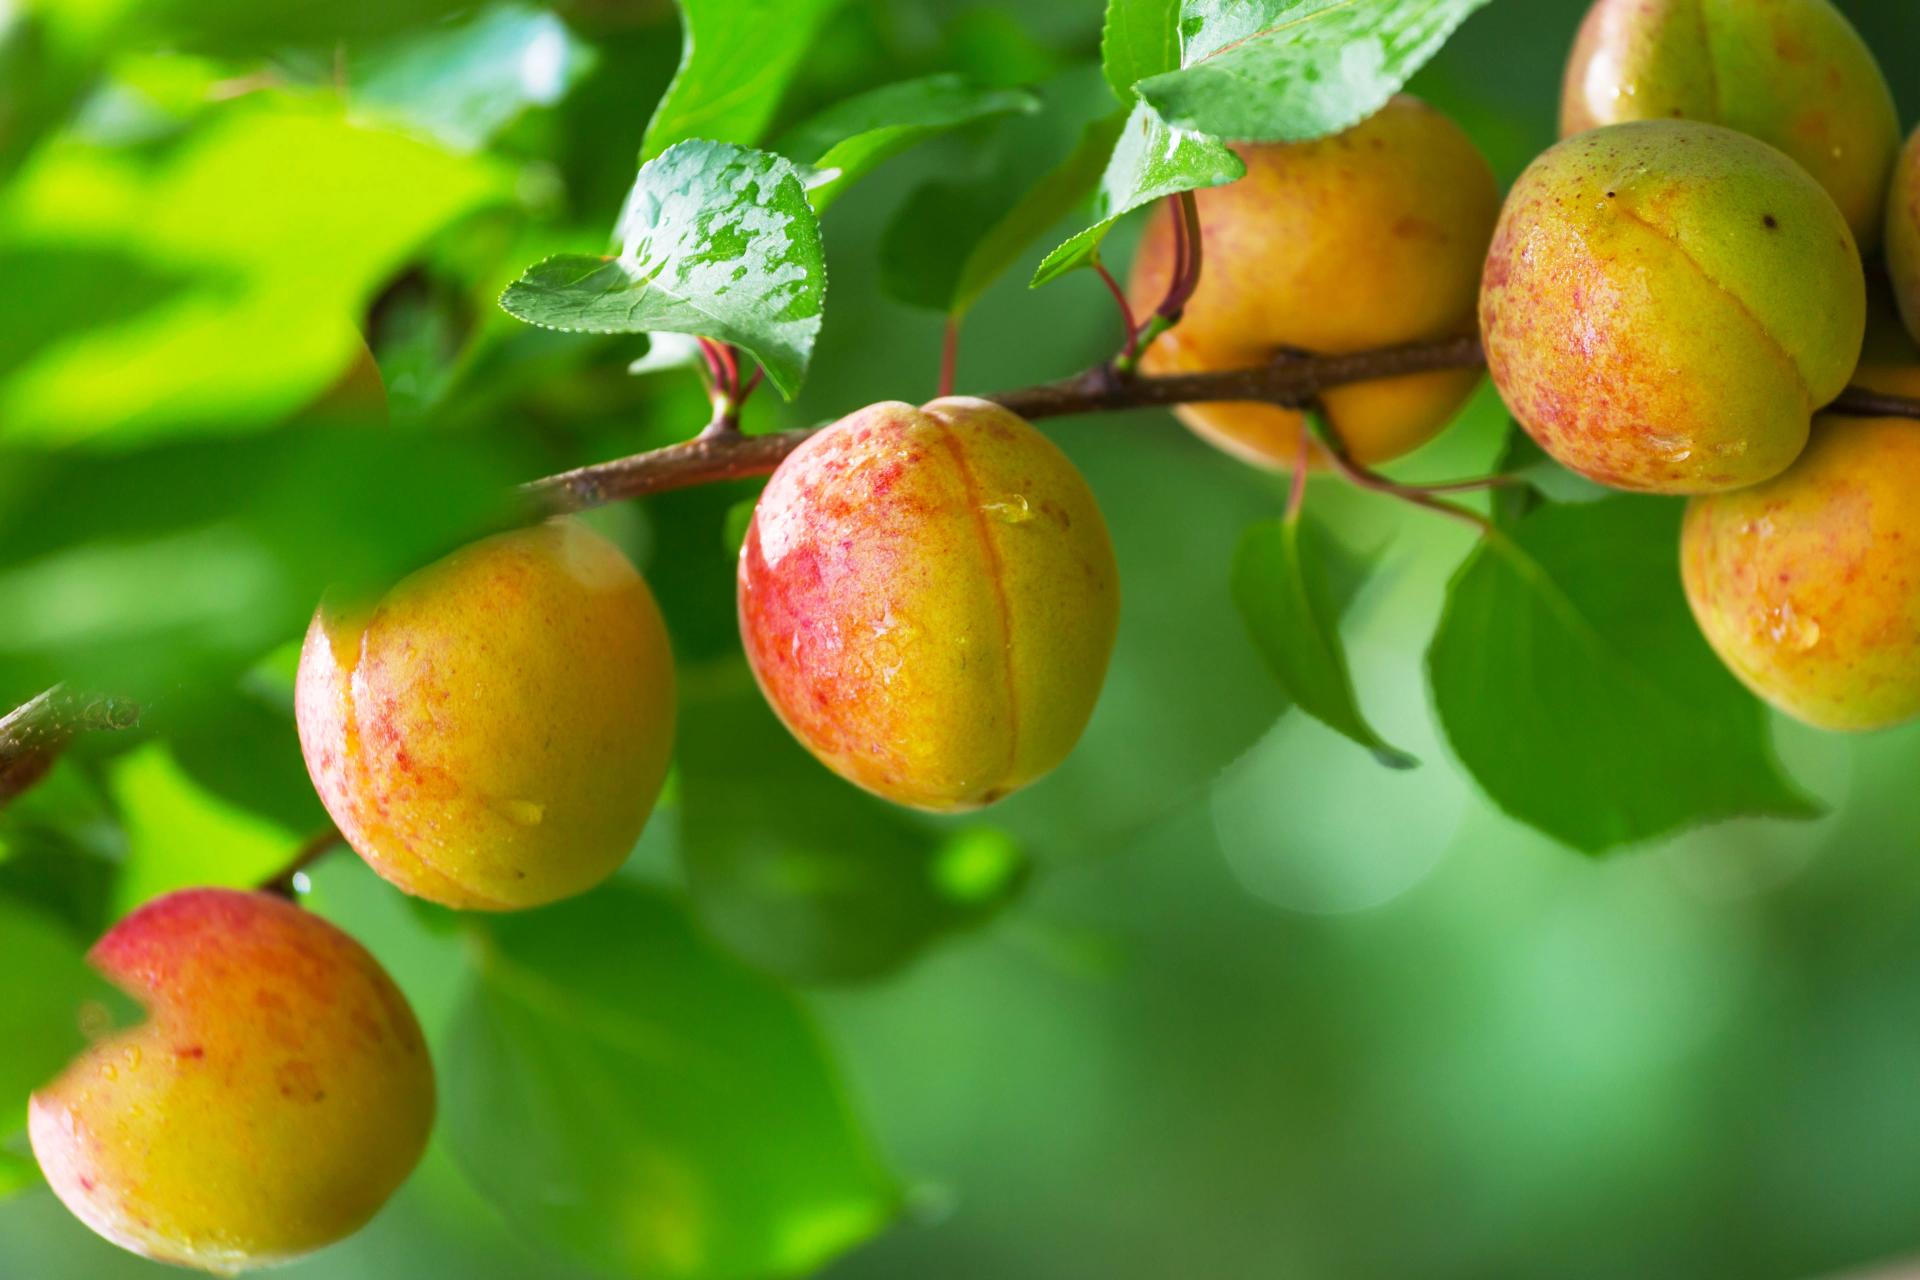 Apricots on a branch